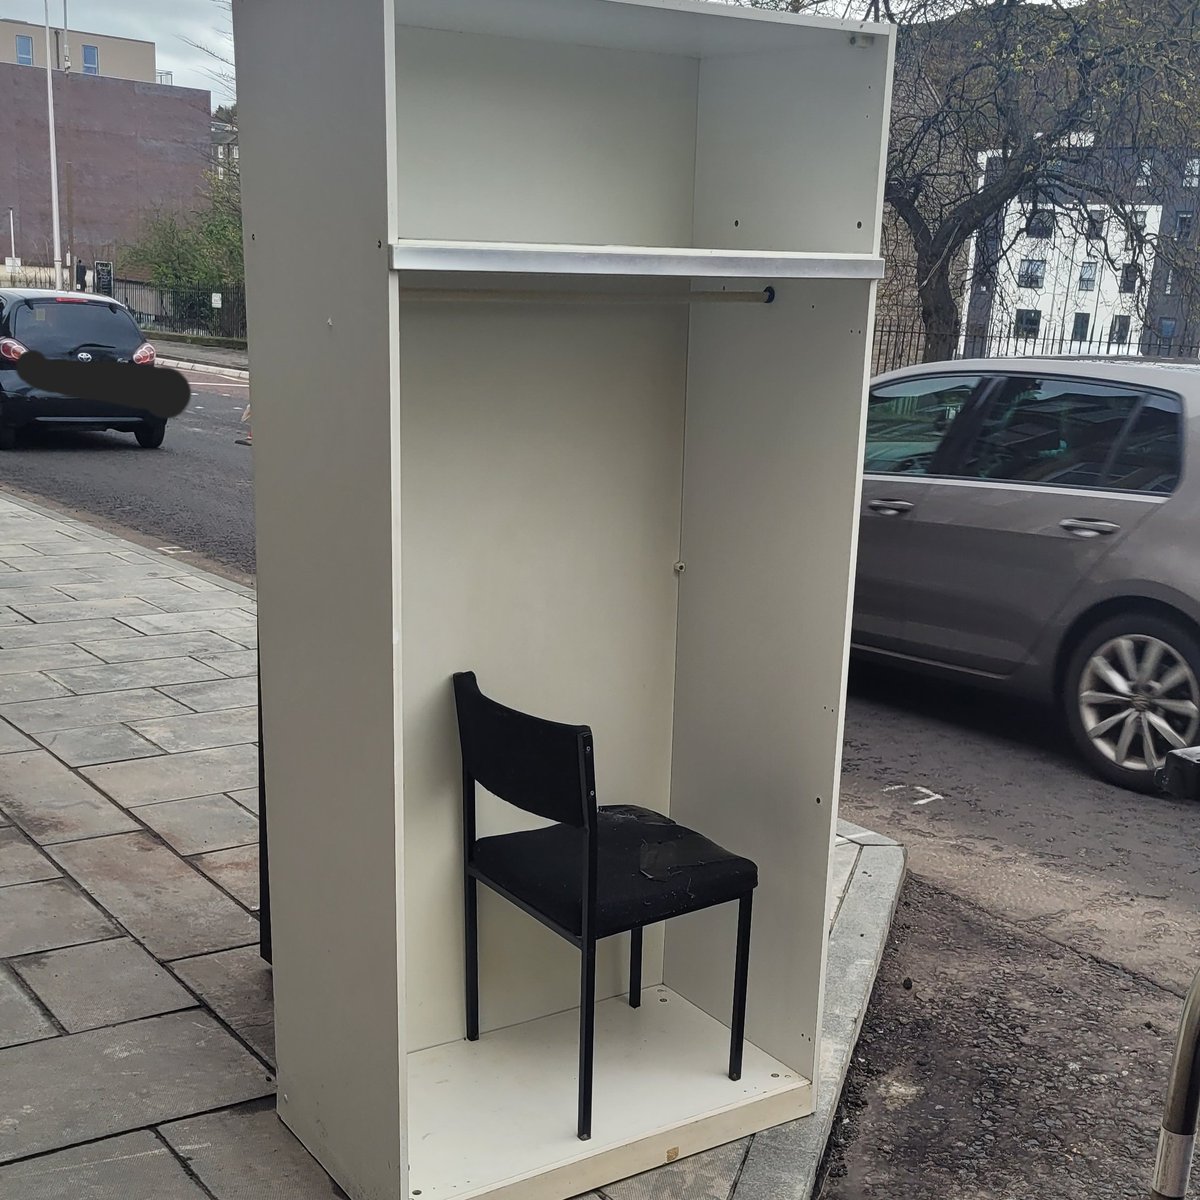 £800 pcm. One-chair flat in prime well-connected location in central Edinburgh. No pets, no students, bills not included.